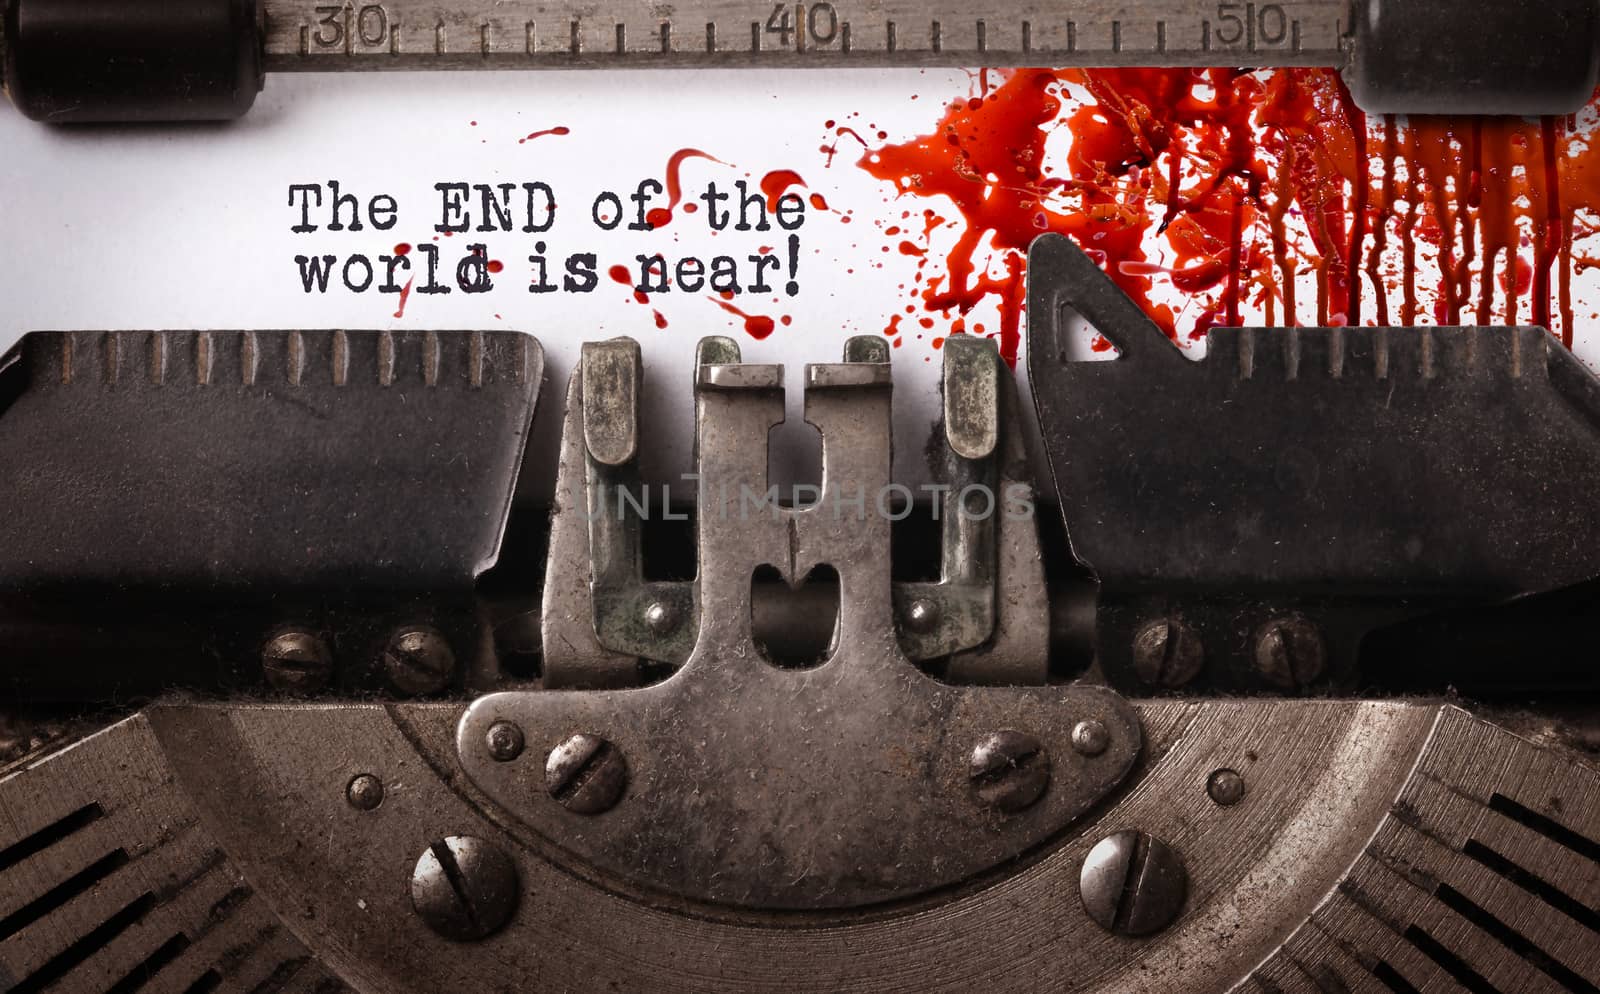 Bloody note - Vintage inscription made by old typewriter, TGhe end of the world is near